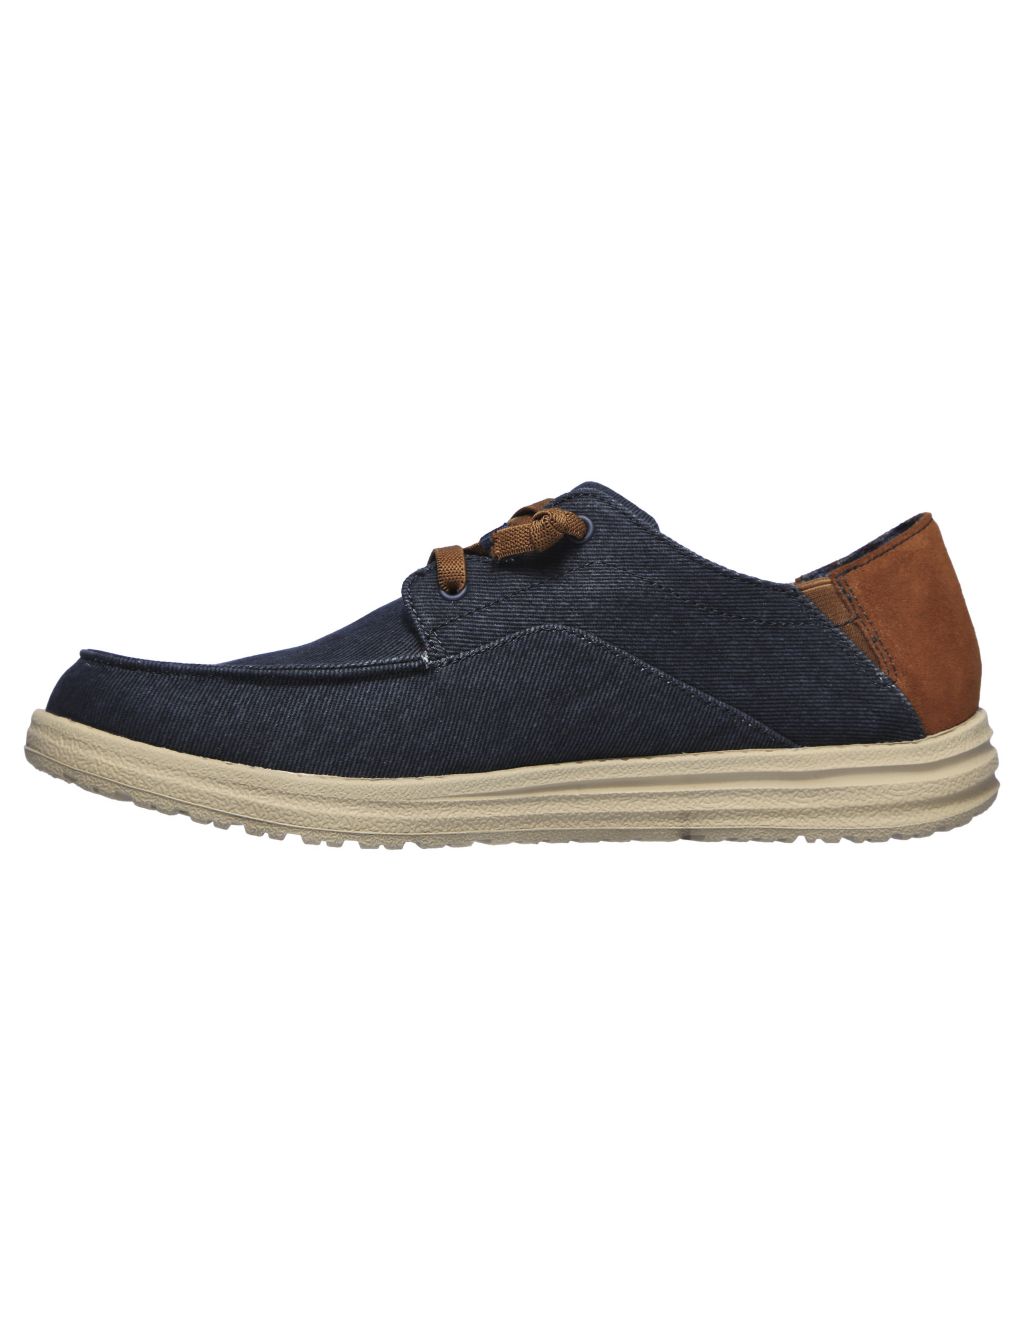 Melson Planon Boat Shoes image 3